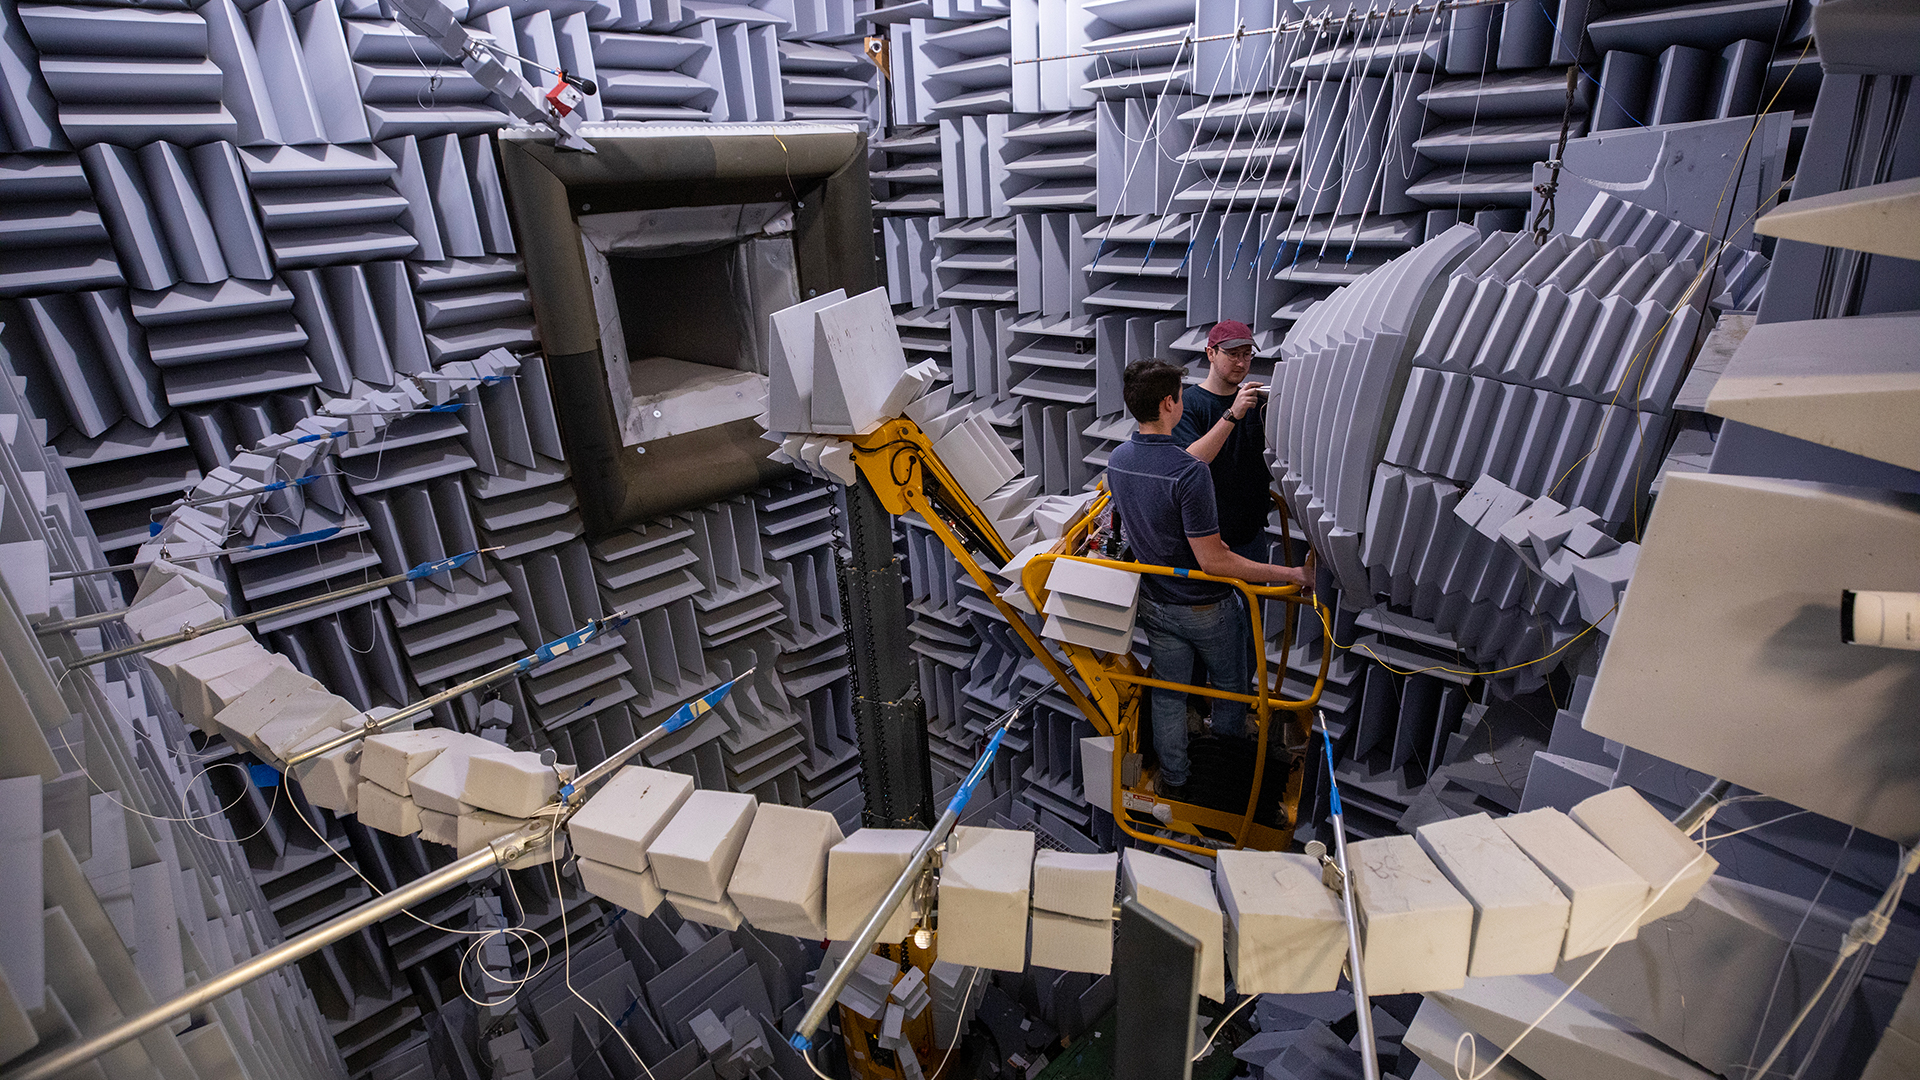 Wide view of two male researchers inside a large acoustic chamber examine a nozzle testing device.